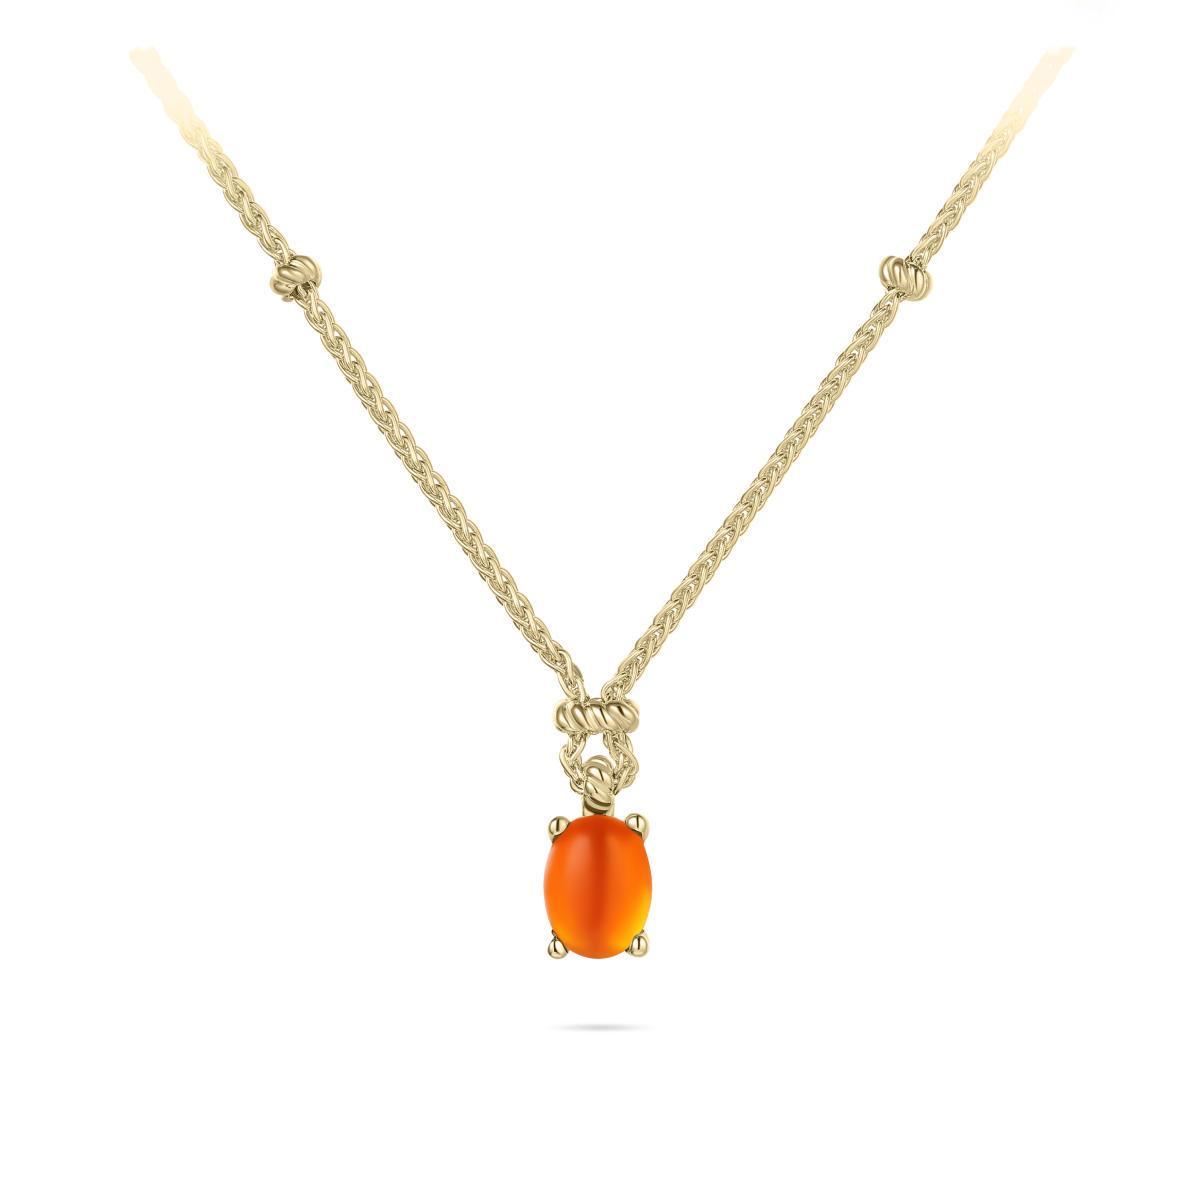 Gold Vermeil Silver Rope Necklace with an Orange Cabochon Pendant - Rococo Jewellery